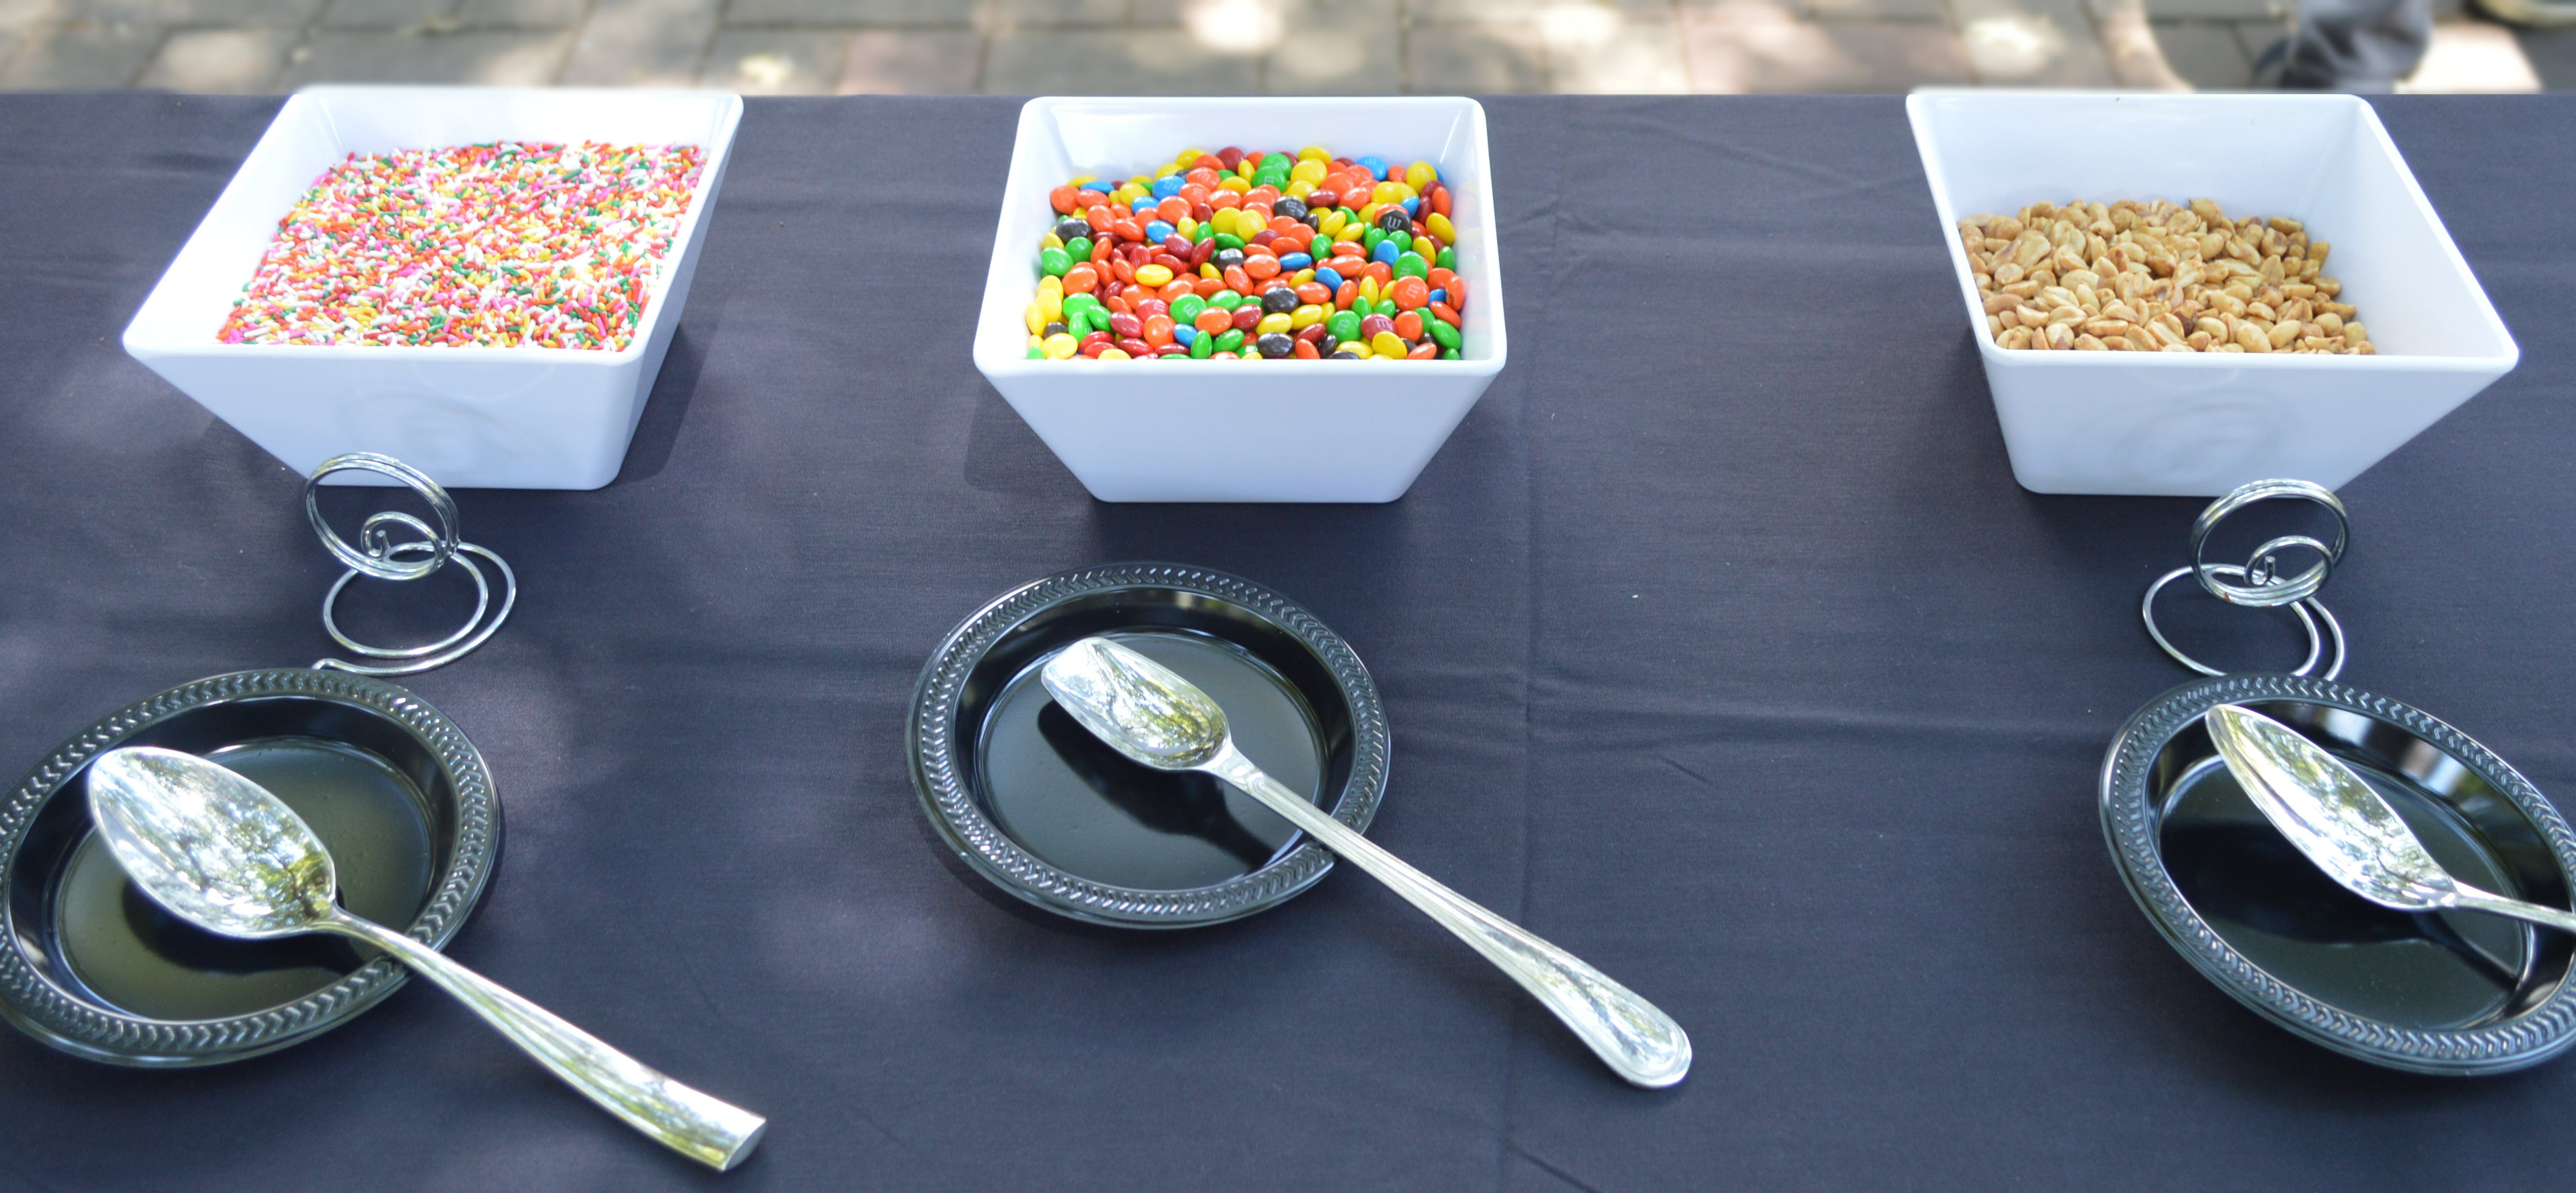 Ice cream toppings in white bowls on a blue tablecloth.